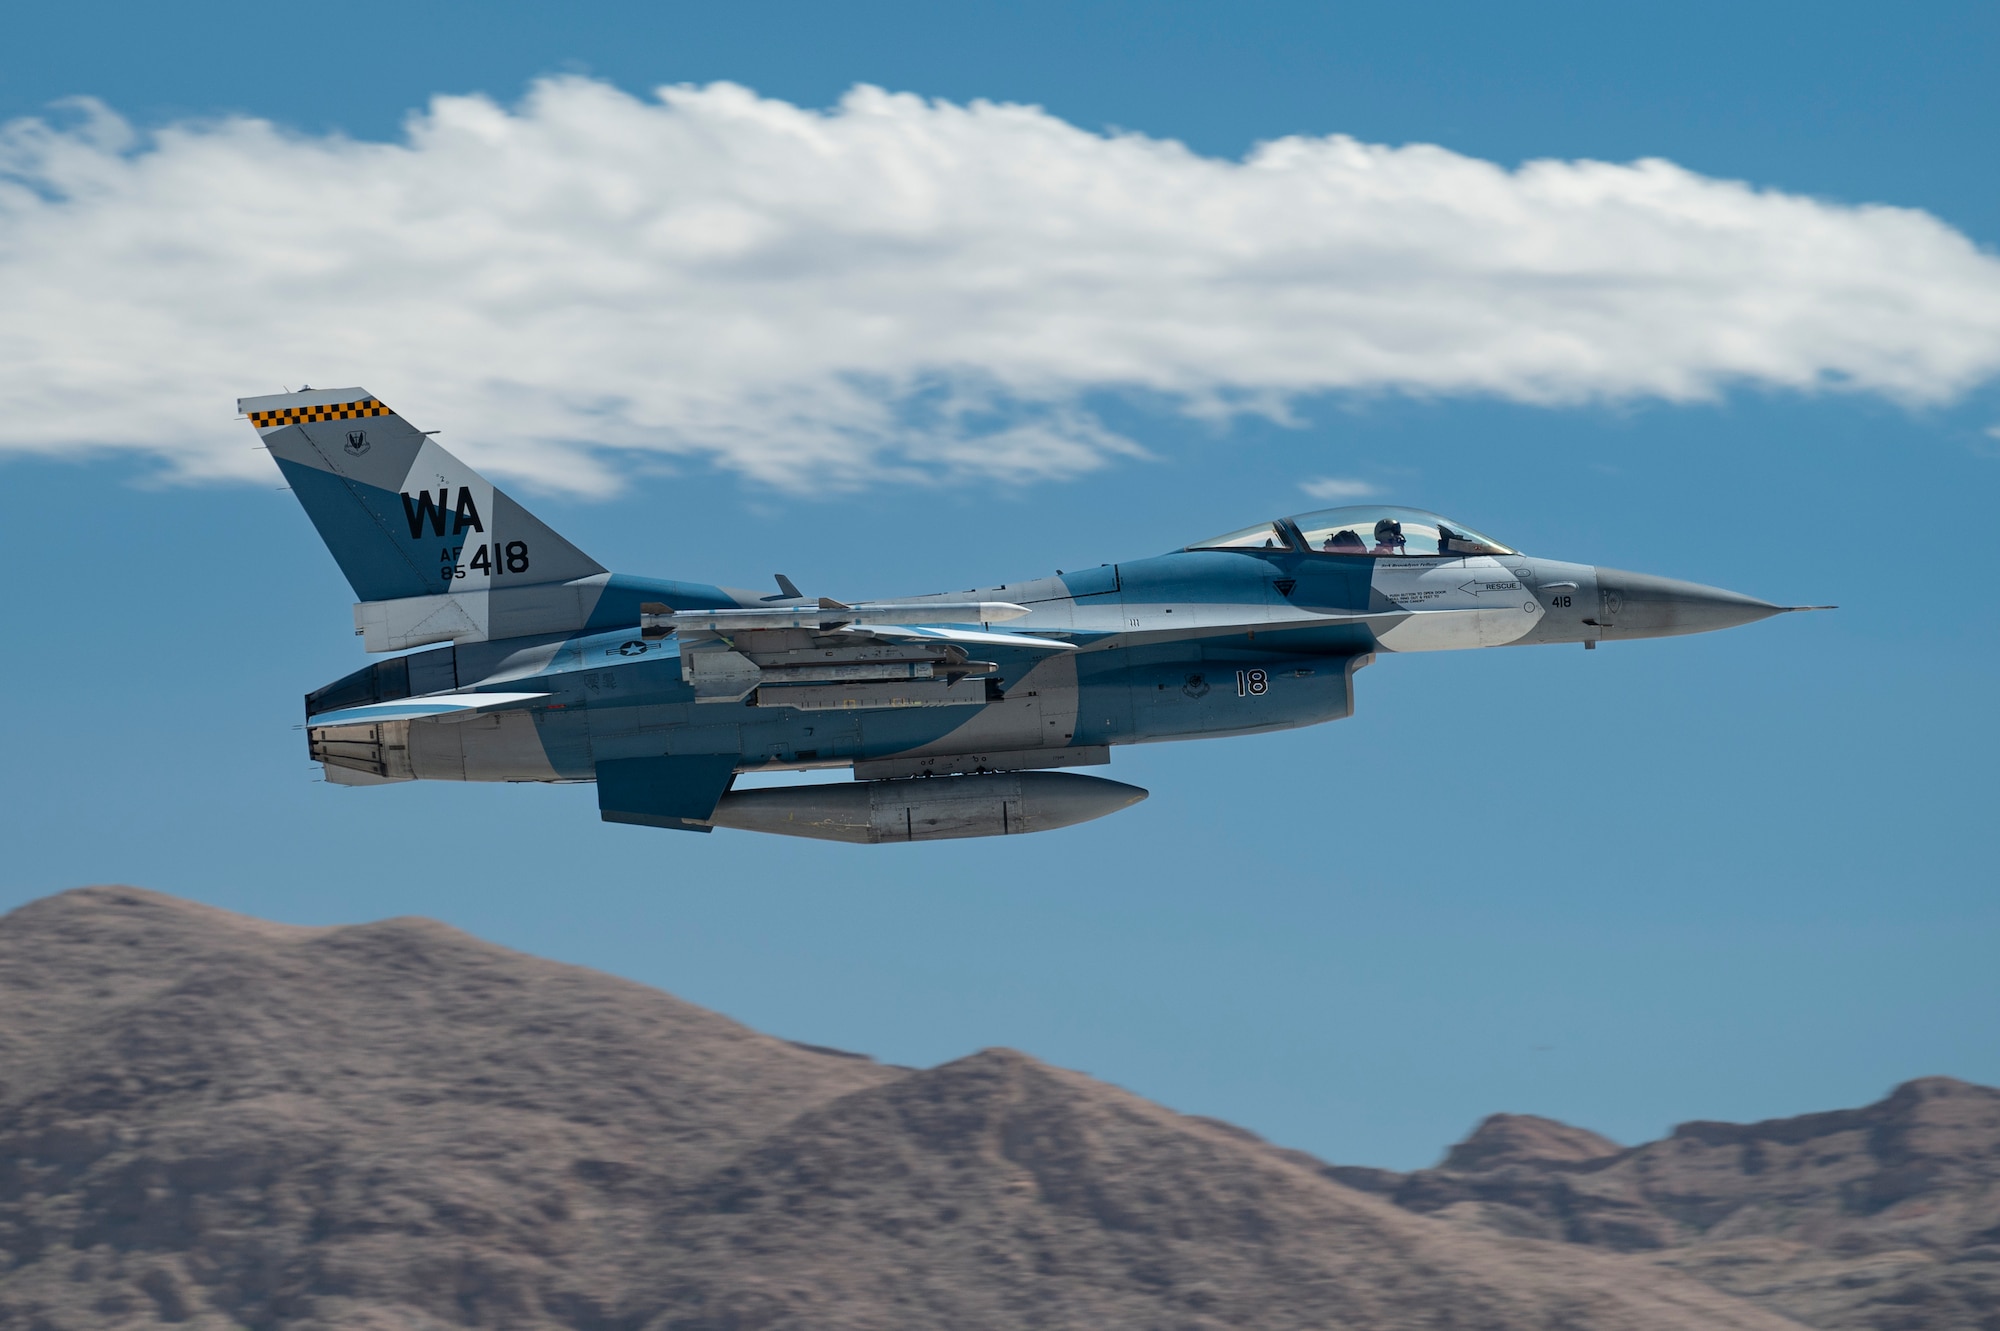 An F-16 Fighting Falcon assigned to the 64th Aggressor Squadron, Nellis Air Force Base, Nevada, takes off in support of Black Flag 22-2, at Nellis Air Force Base, Sept. 20 Sept. 2022. The 64th AGRS provided adversary air during the exercise. This Black Flag assessed interoperability of near-future capabilities across the domains and services with a focus on tactical data link and consolidated F-35 cross service maintenance and logistics. (U.S. Air Force photo by William R. Lewis)